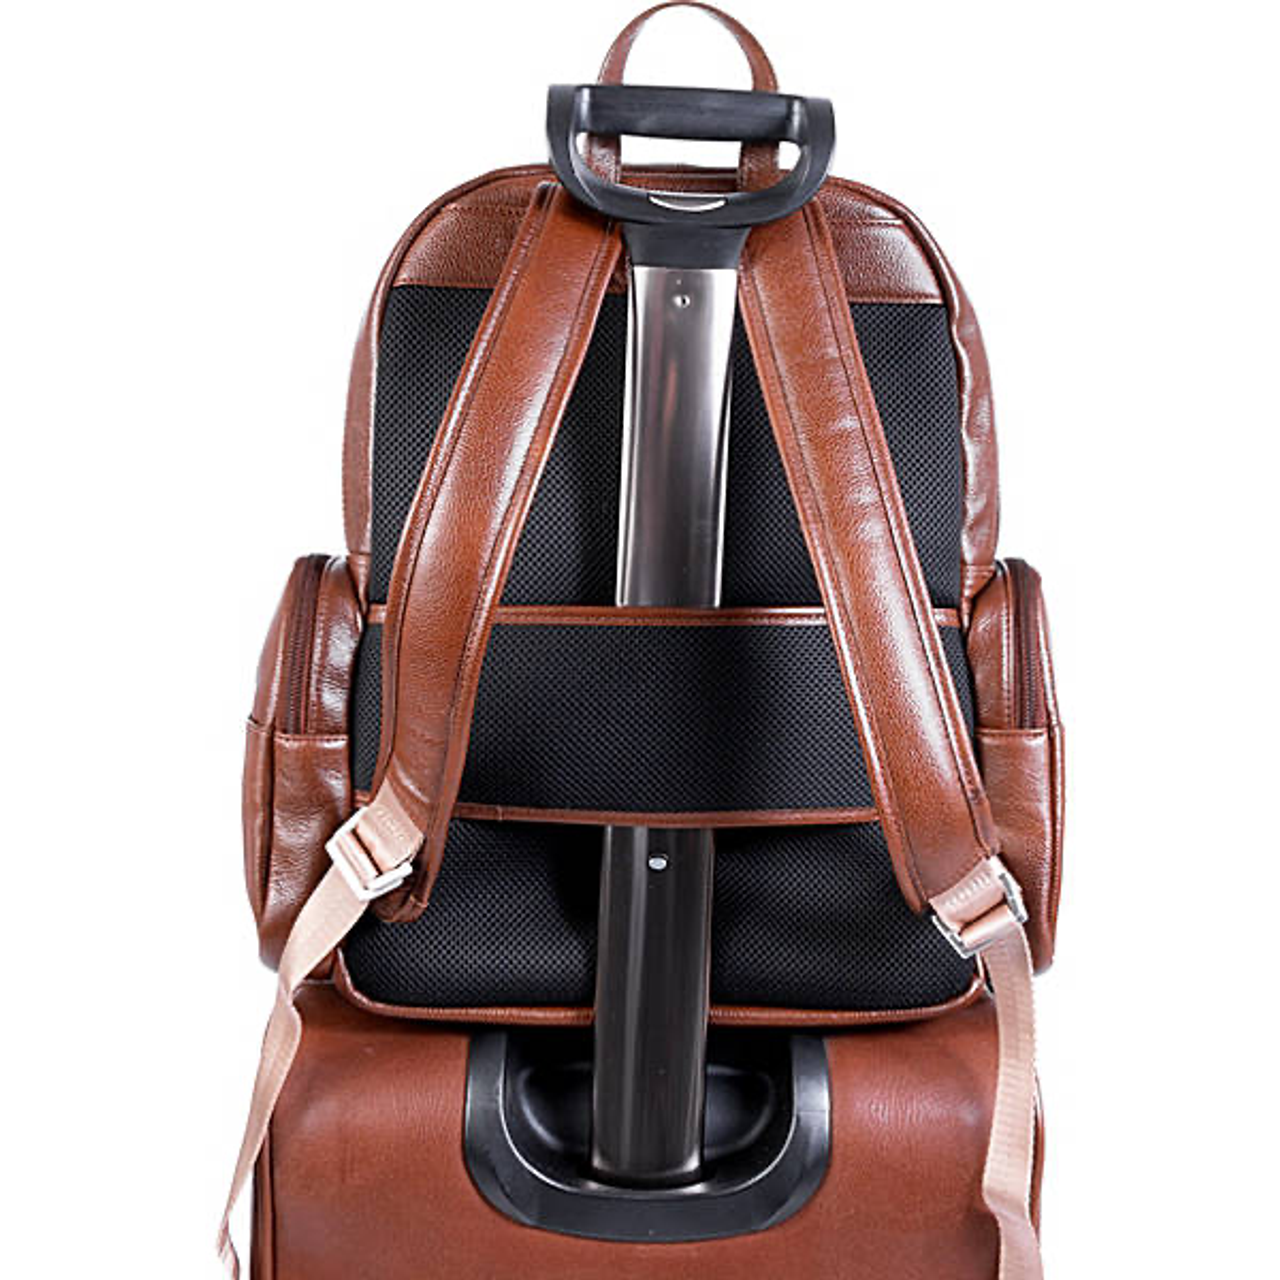 Cumberland Leather Laptop Backpack - Leather Loom